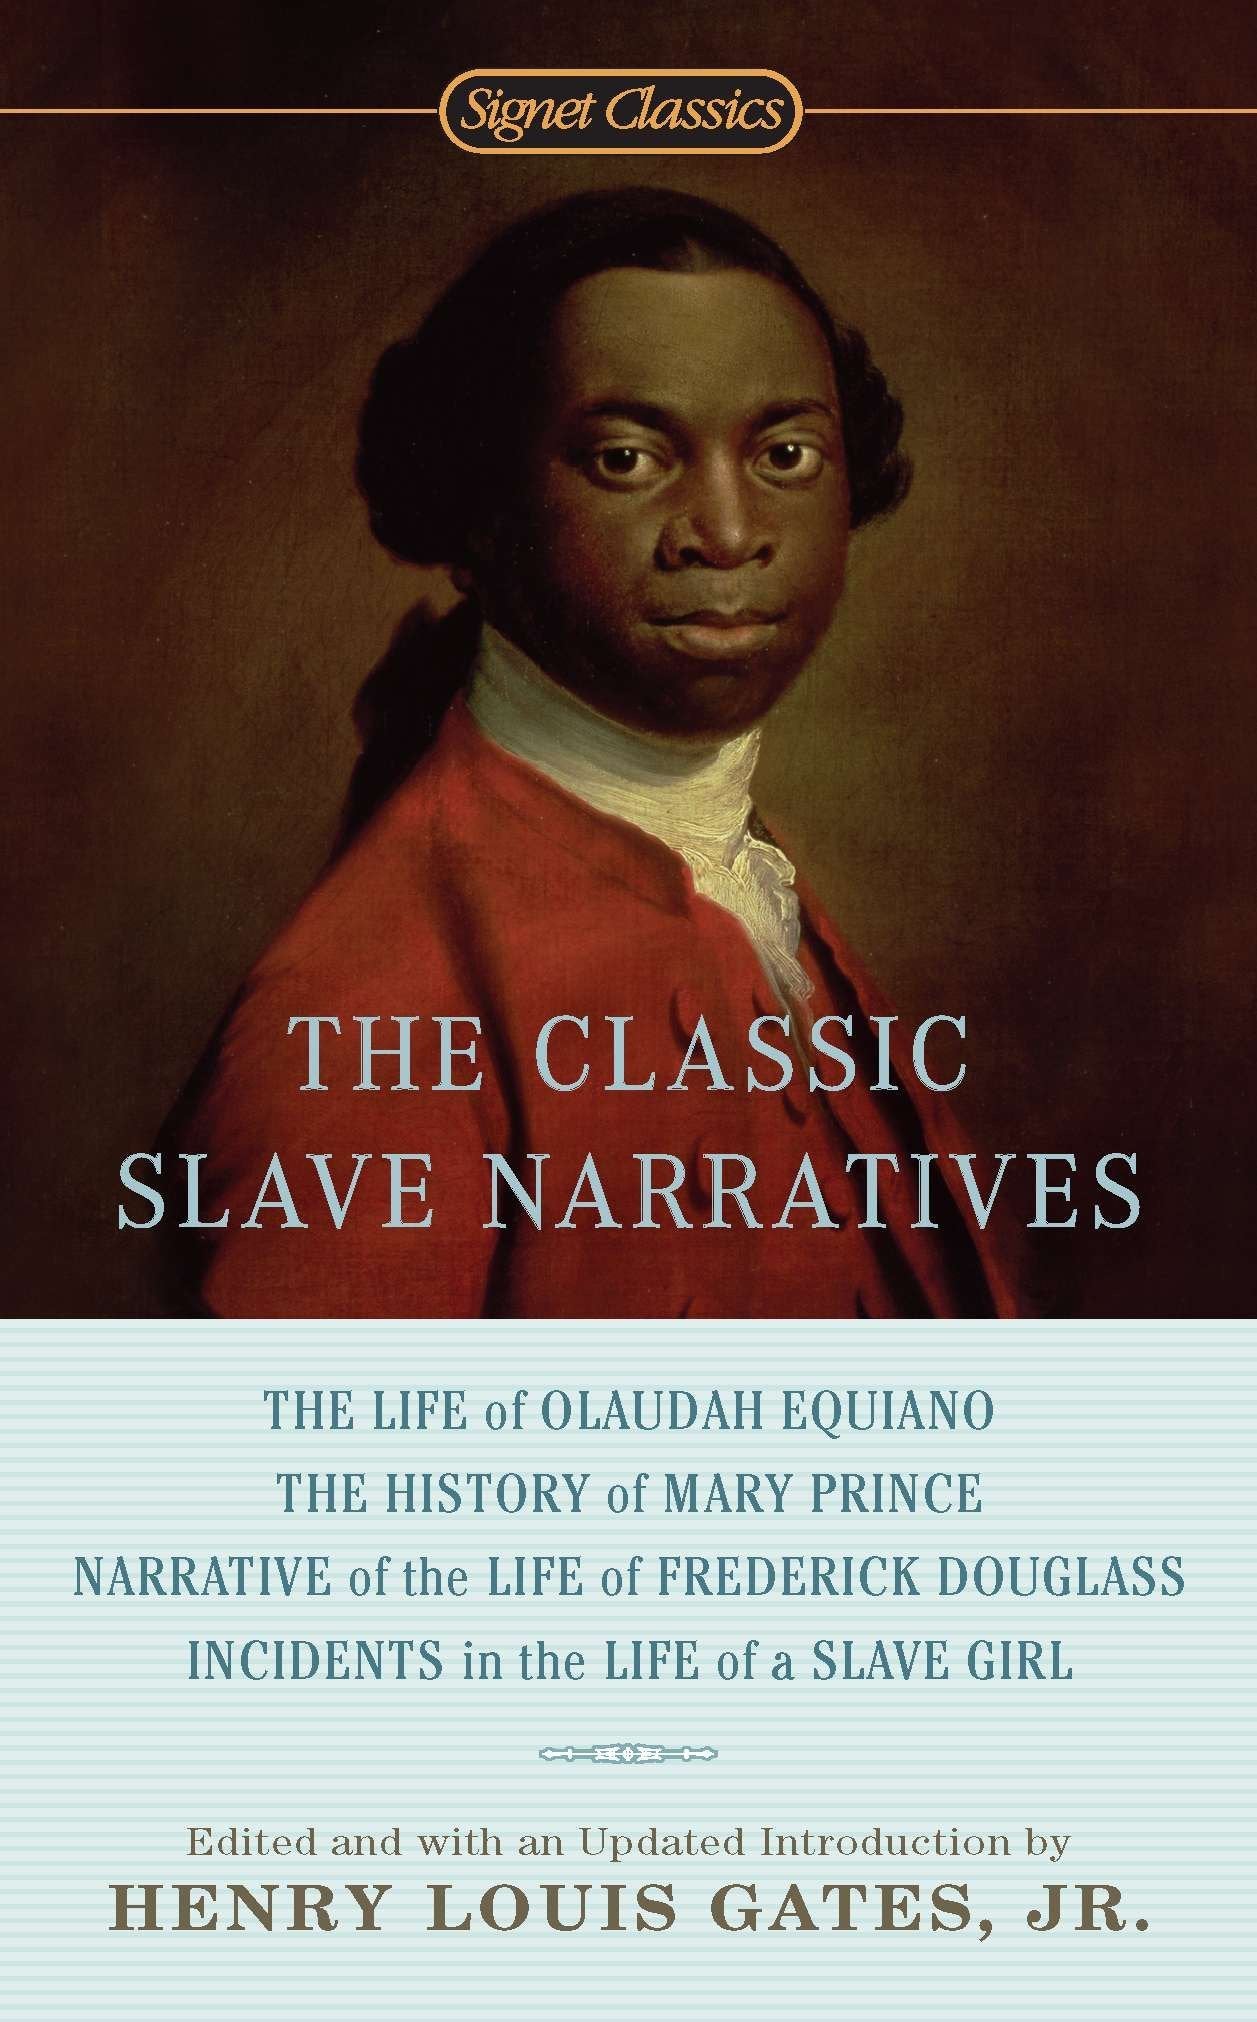 The Classic Slave Narratives edited by Henry Louis Gates, Jr.